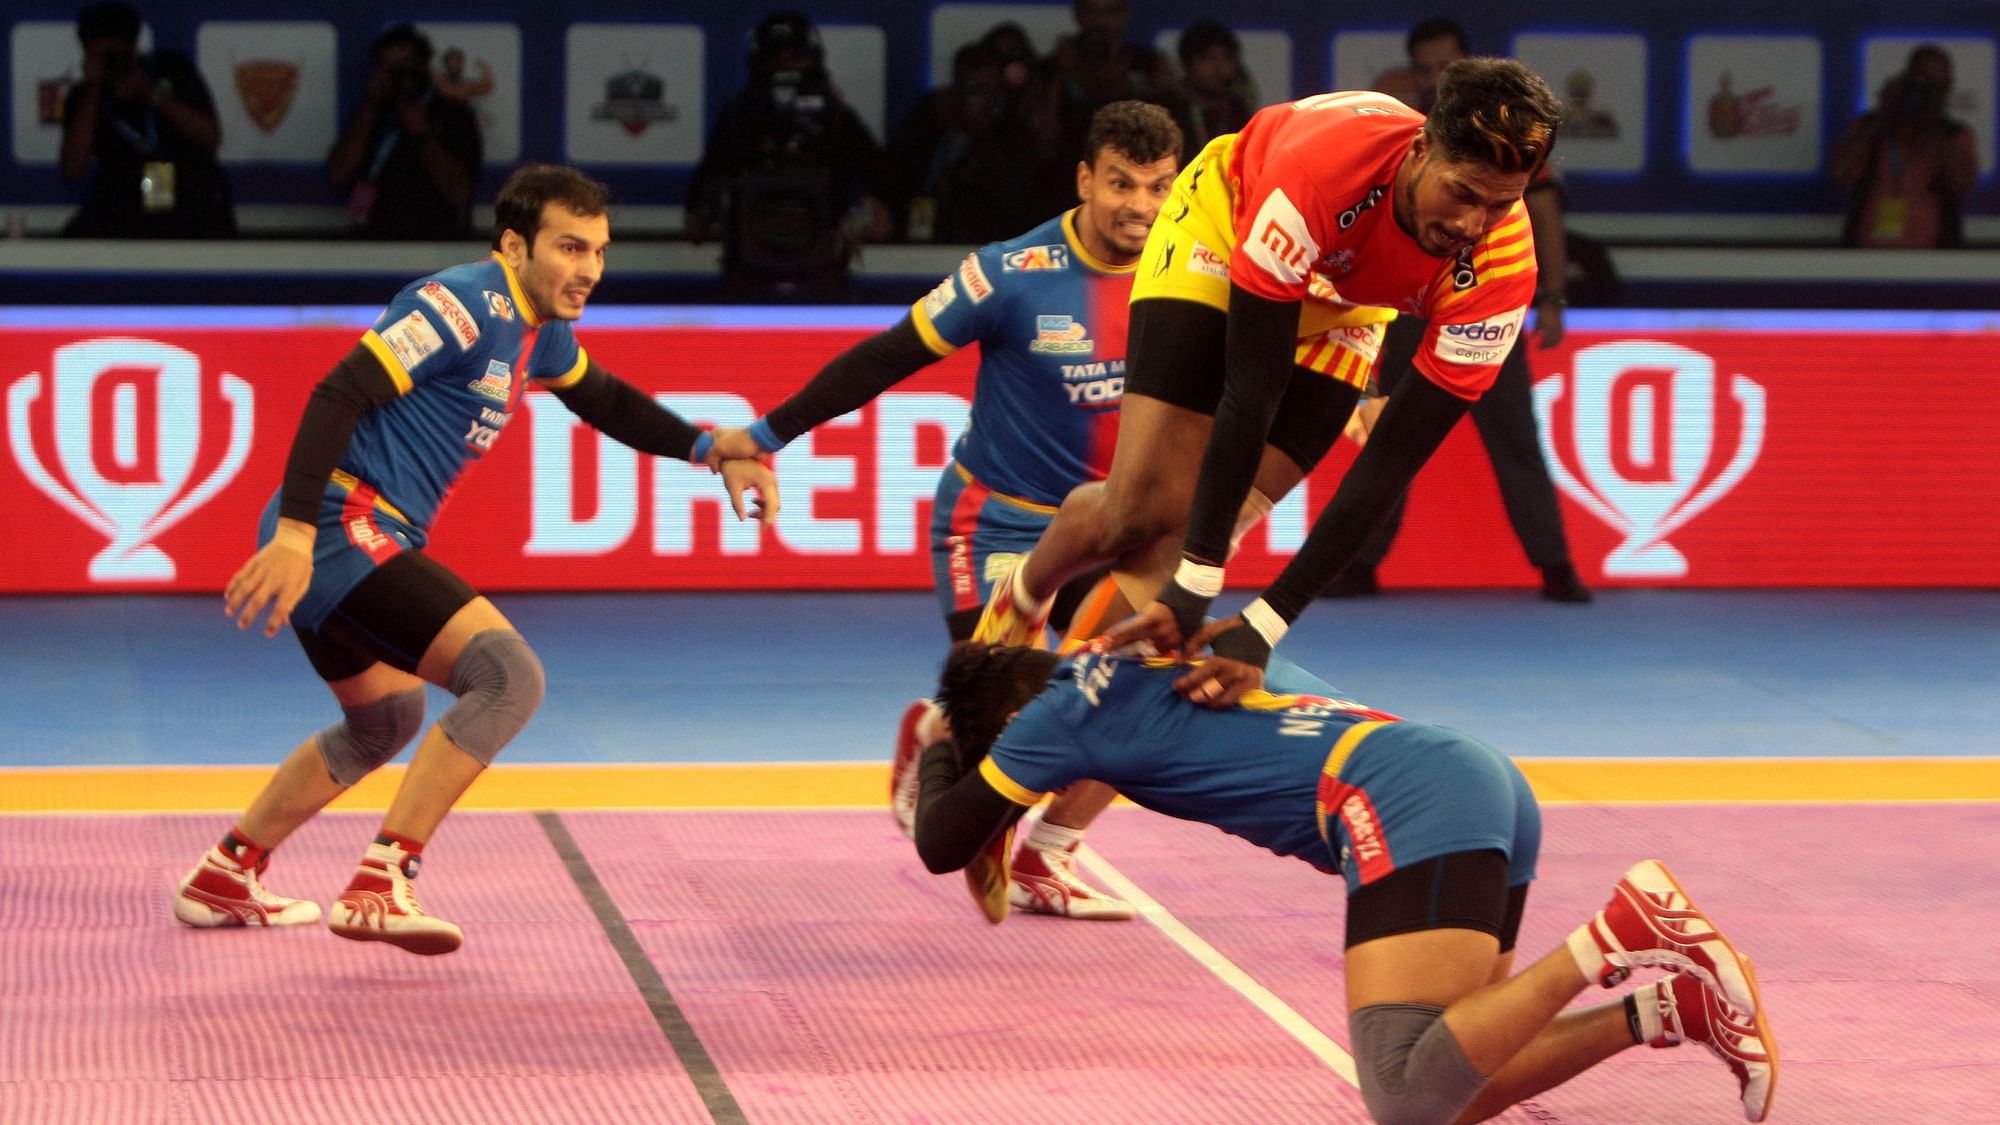 Gujarat Fortunegiants produced an impressive performance as they beat UP Yoddha 38-31 to enter the final of Vivo Pro Kabaddi League season 6.